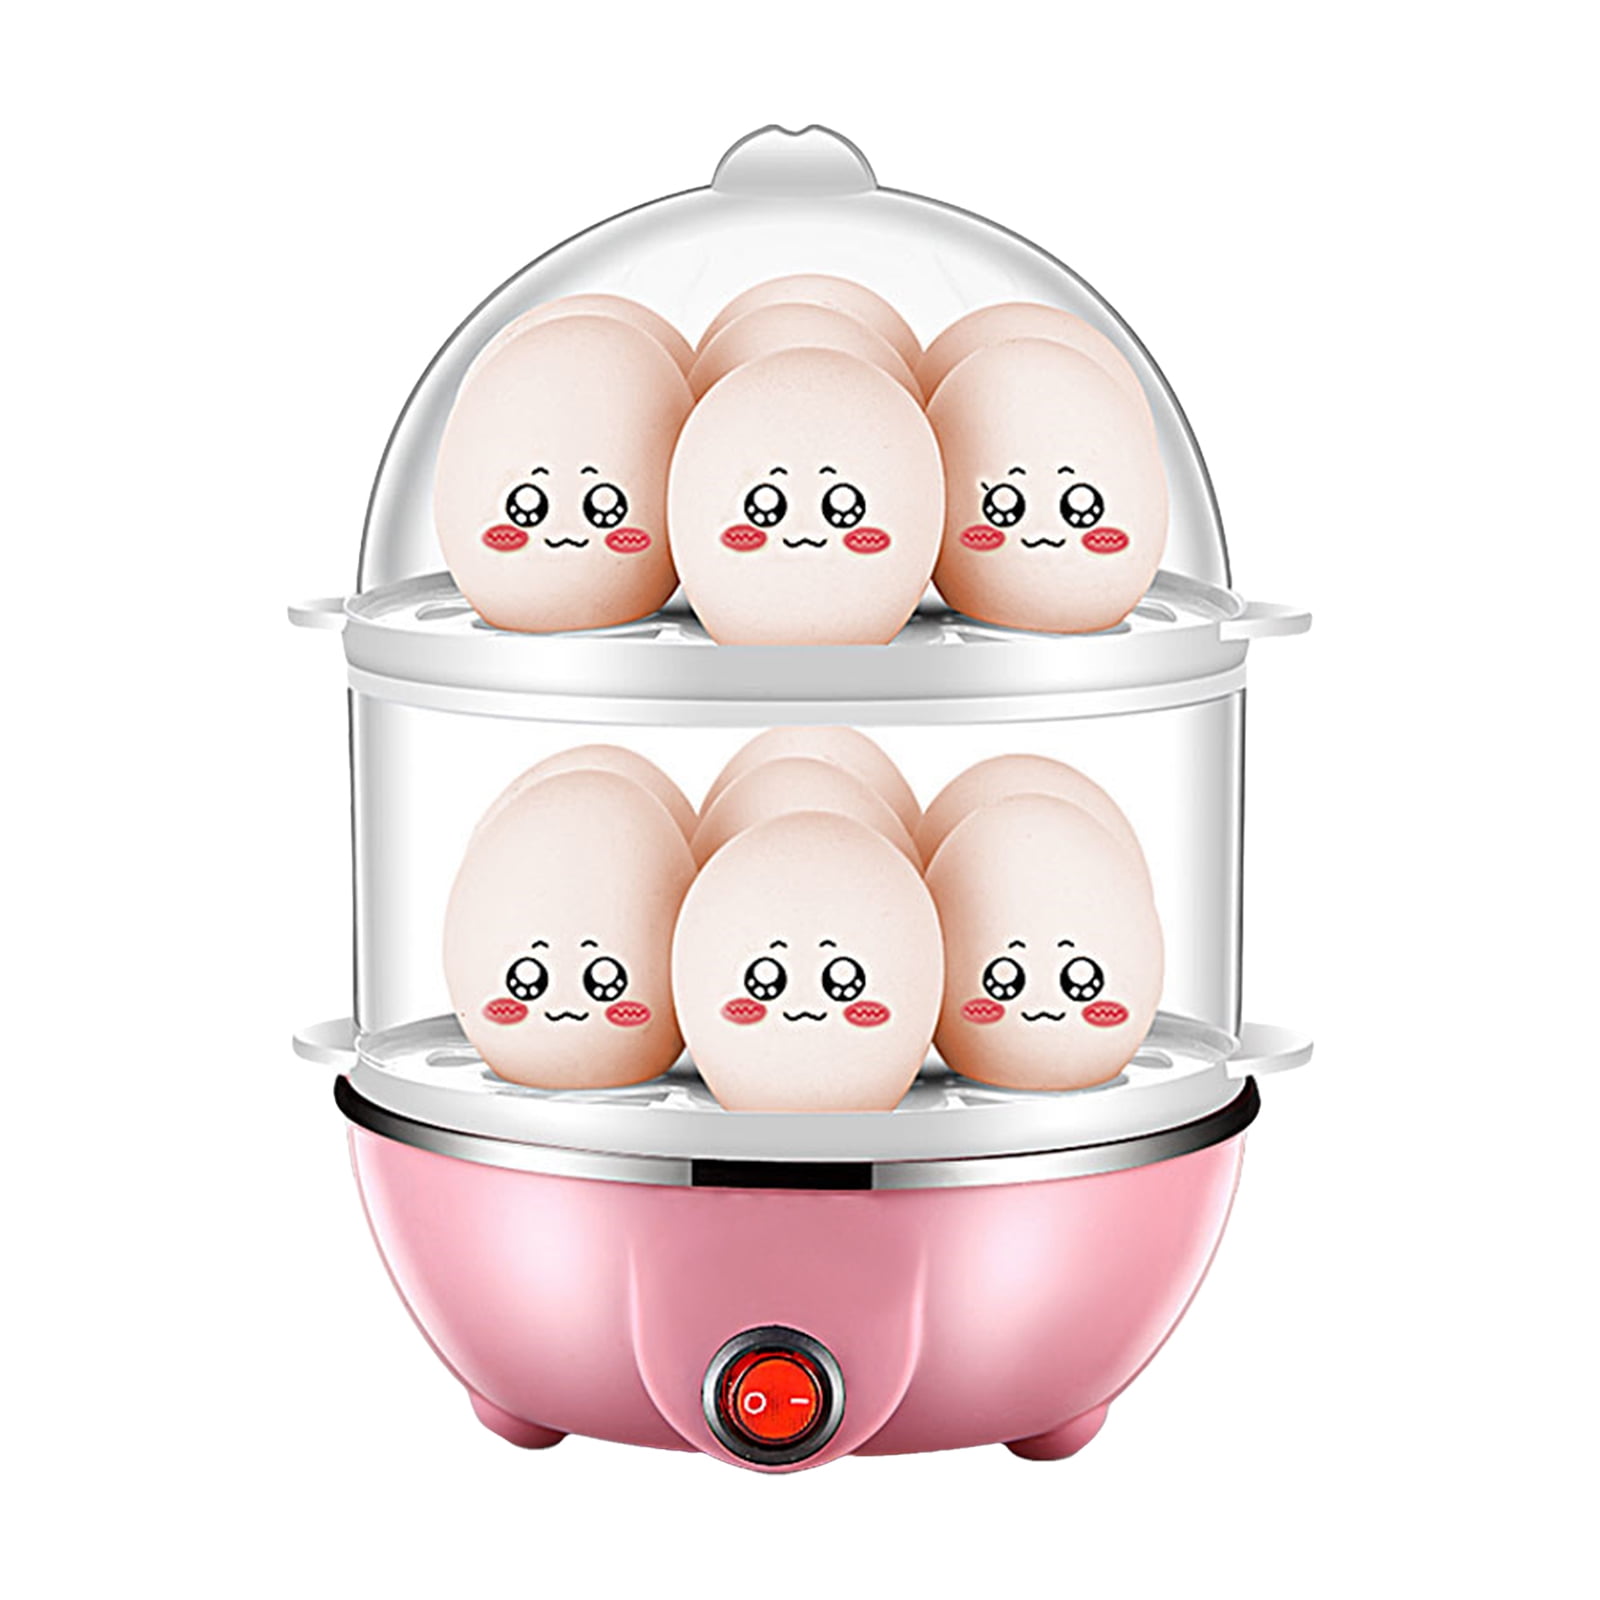 Multifunctional Double Layer Electric Egg Cooker – Planet Wonders